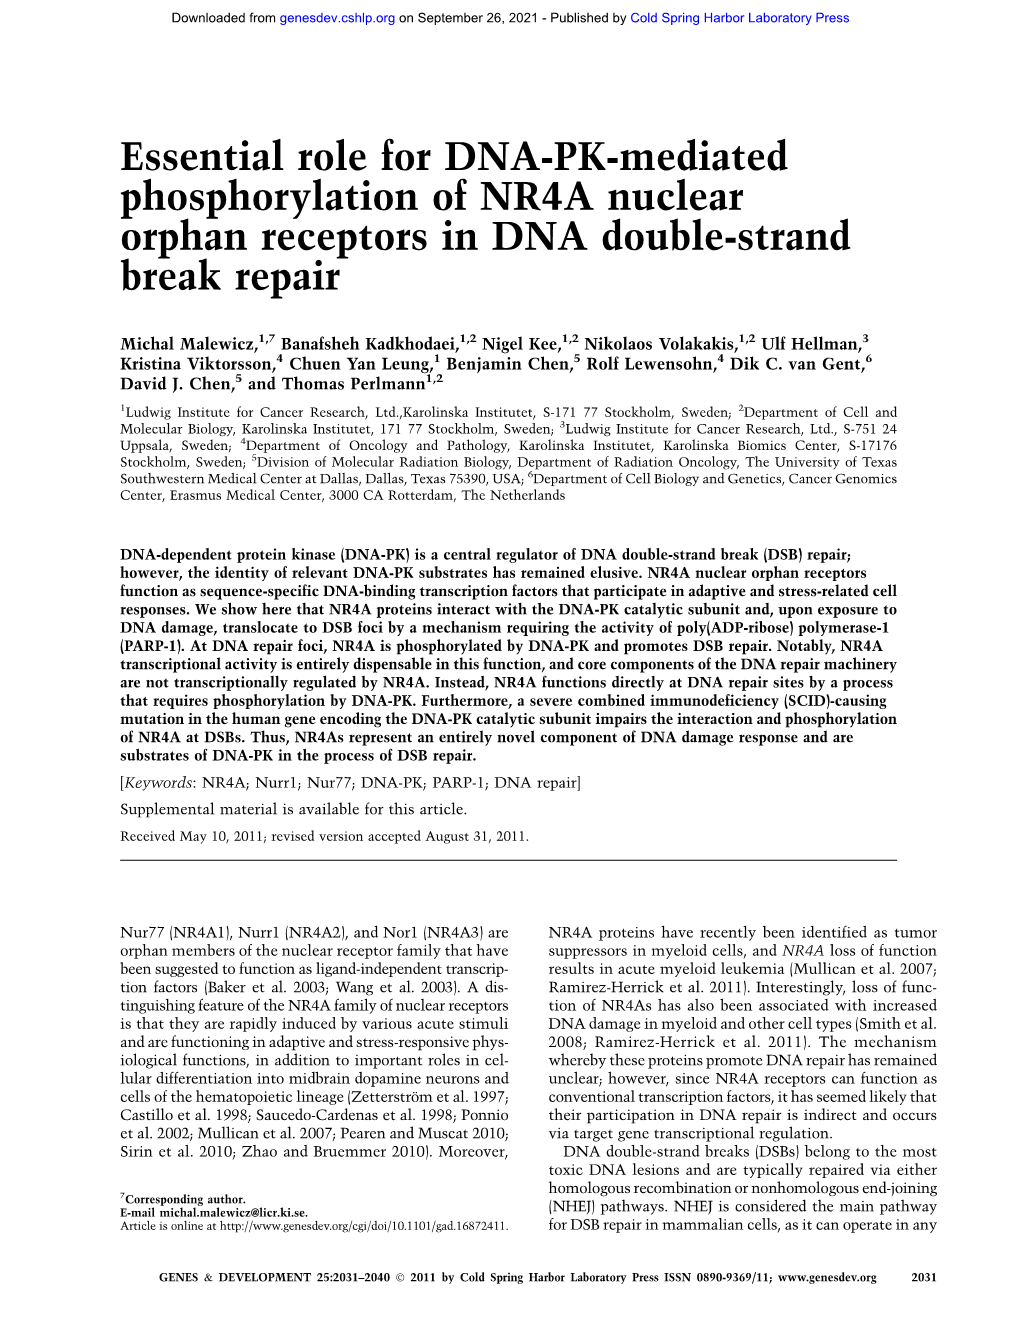 Essential Role for DNA-PK-Mediated Phosphorylation of NR4A Nuclear Orphan Receptors in DNA Double-Strand Break Repair